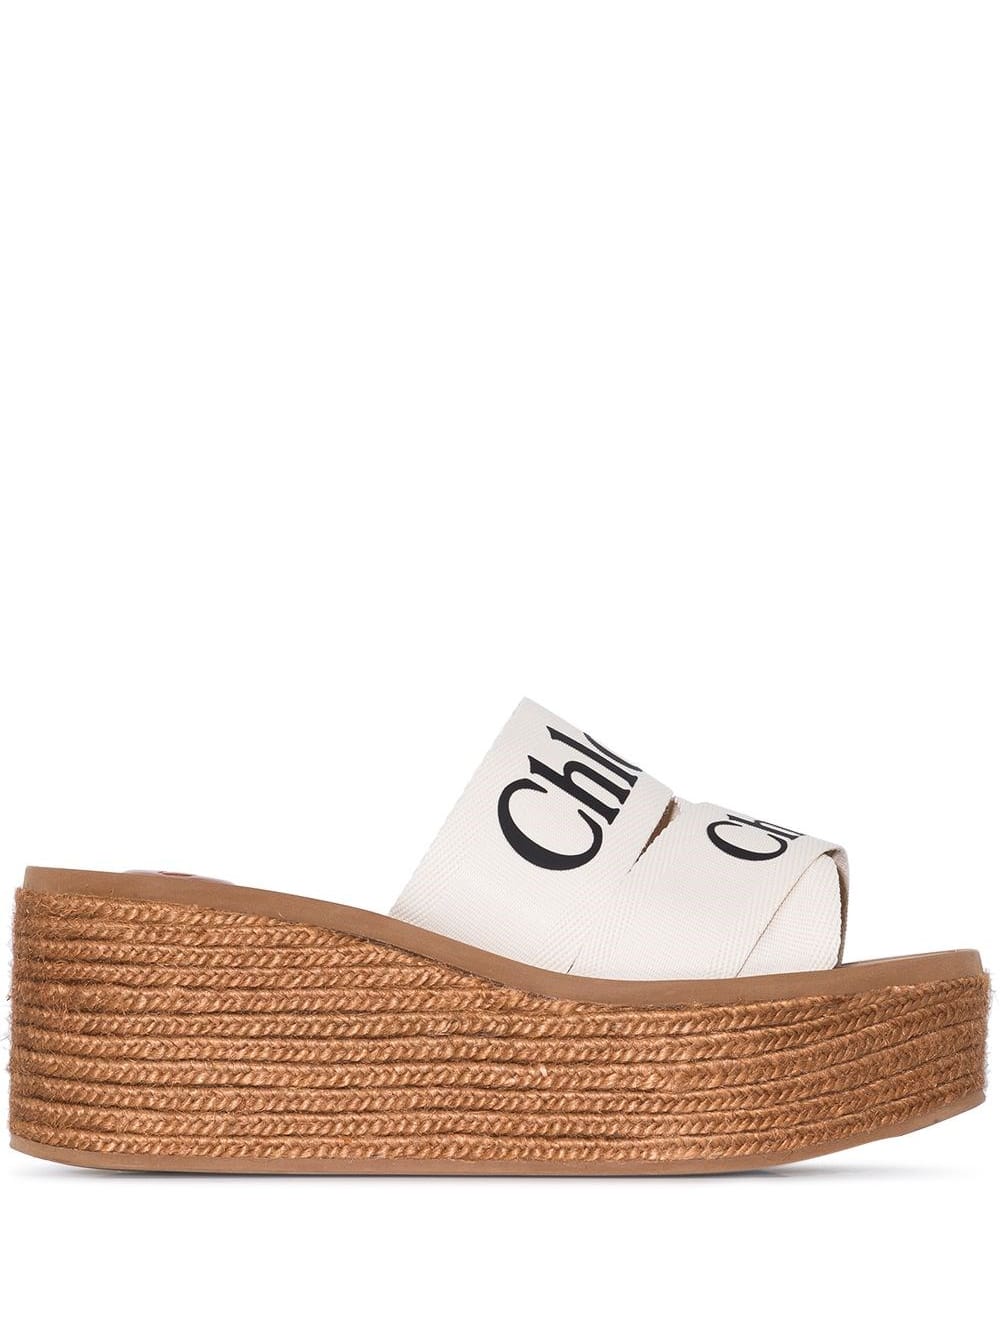 CHLOÉ CHLOÉ WOMANS WOODY LEATHER AND CANVAS WEDGE ESPADRILLES